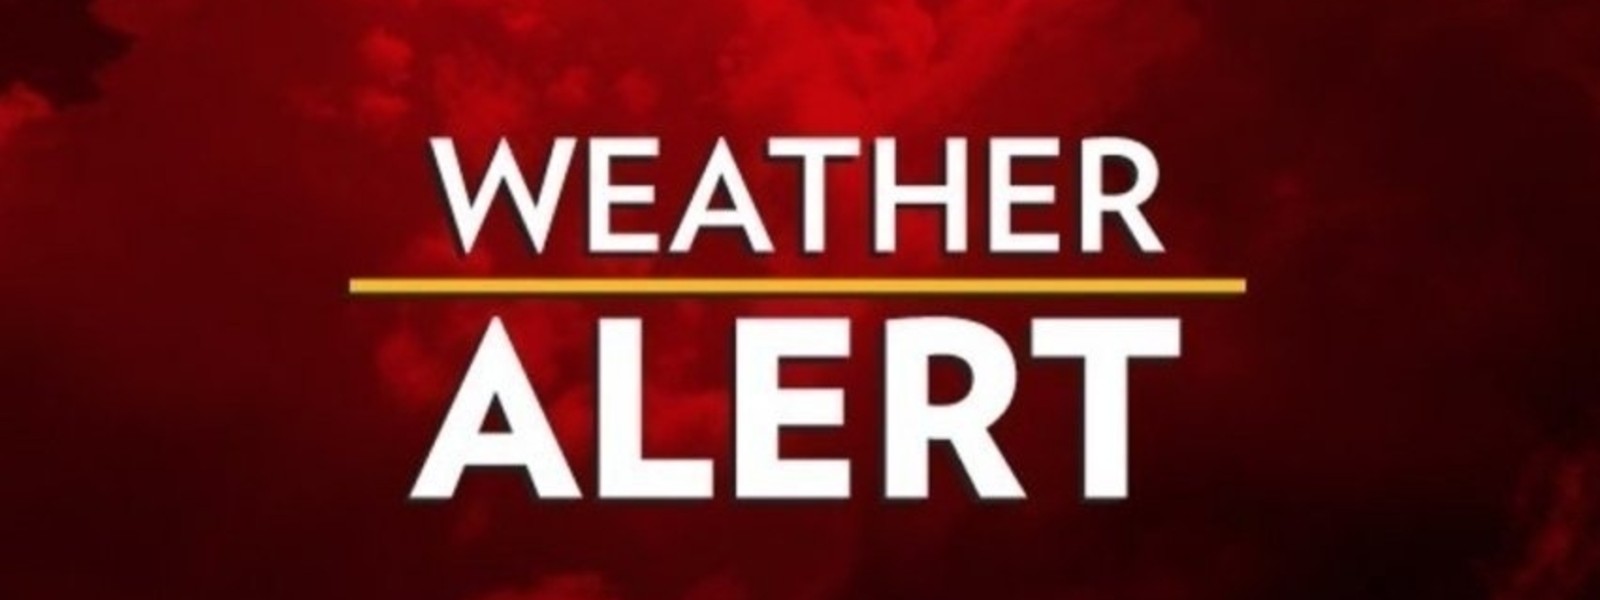 Amber alert issued for heavy rain & strong winds